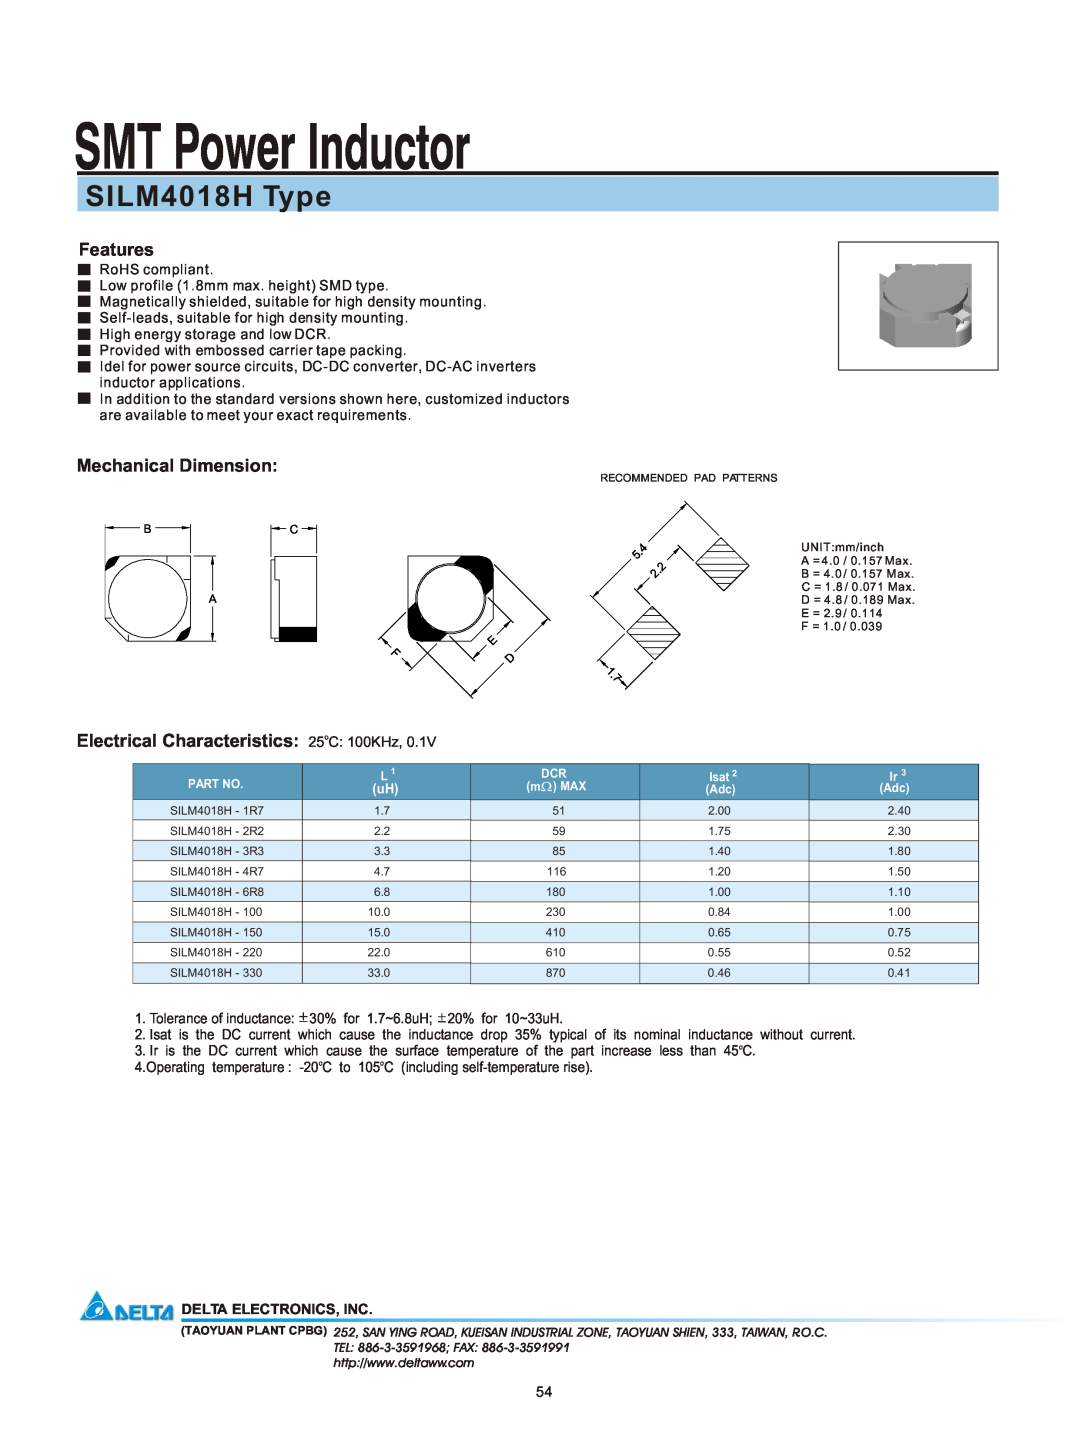 Delta Electronics manual SMT Power Inductor, SILM4018H Type, Features, Mechanical Dimension, Delta Electronics, Inc 